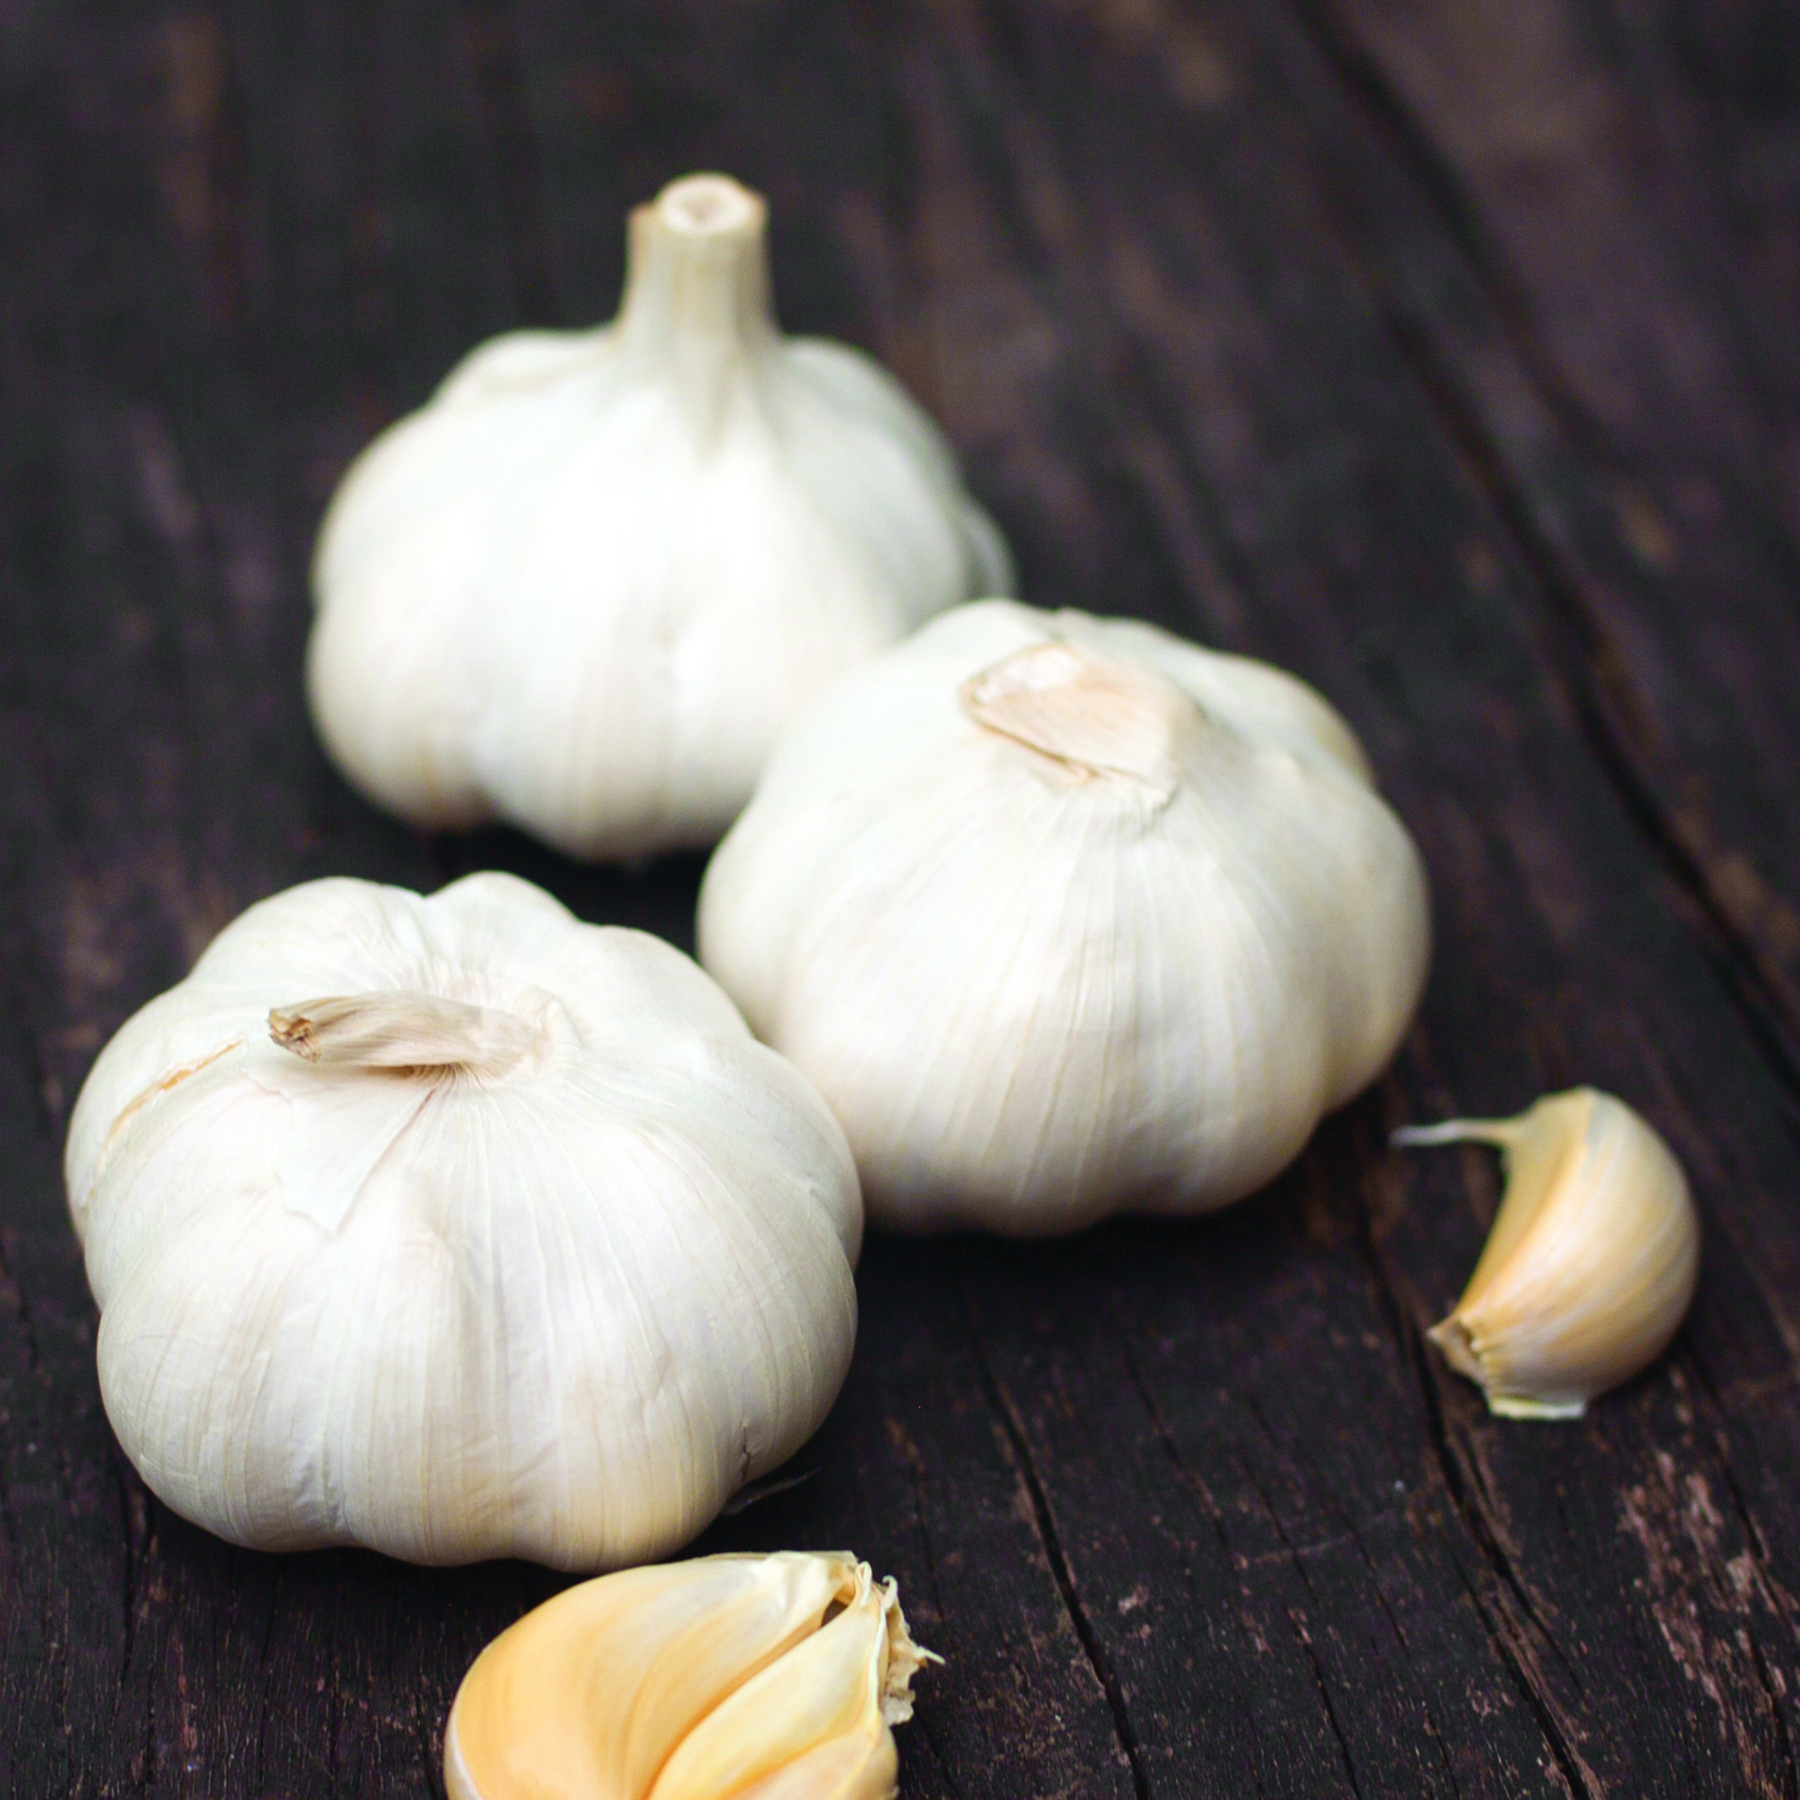 A color photograph of some bulbs of garlic